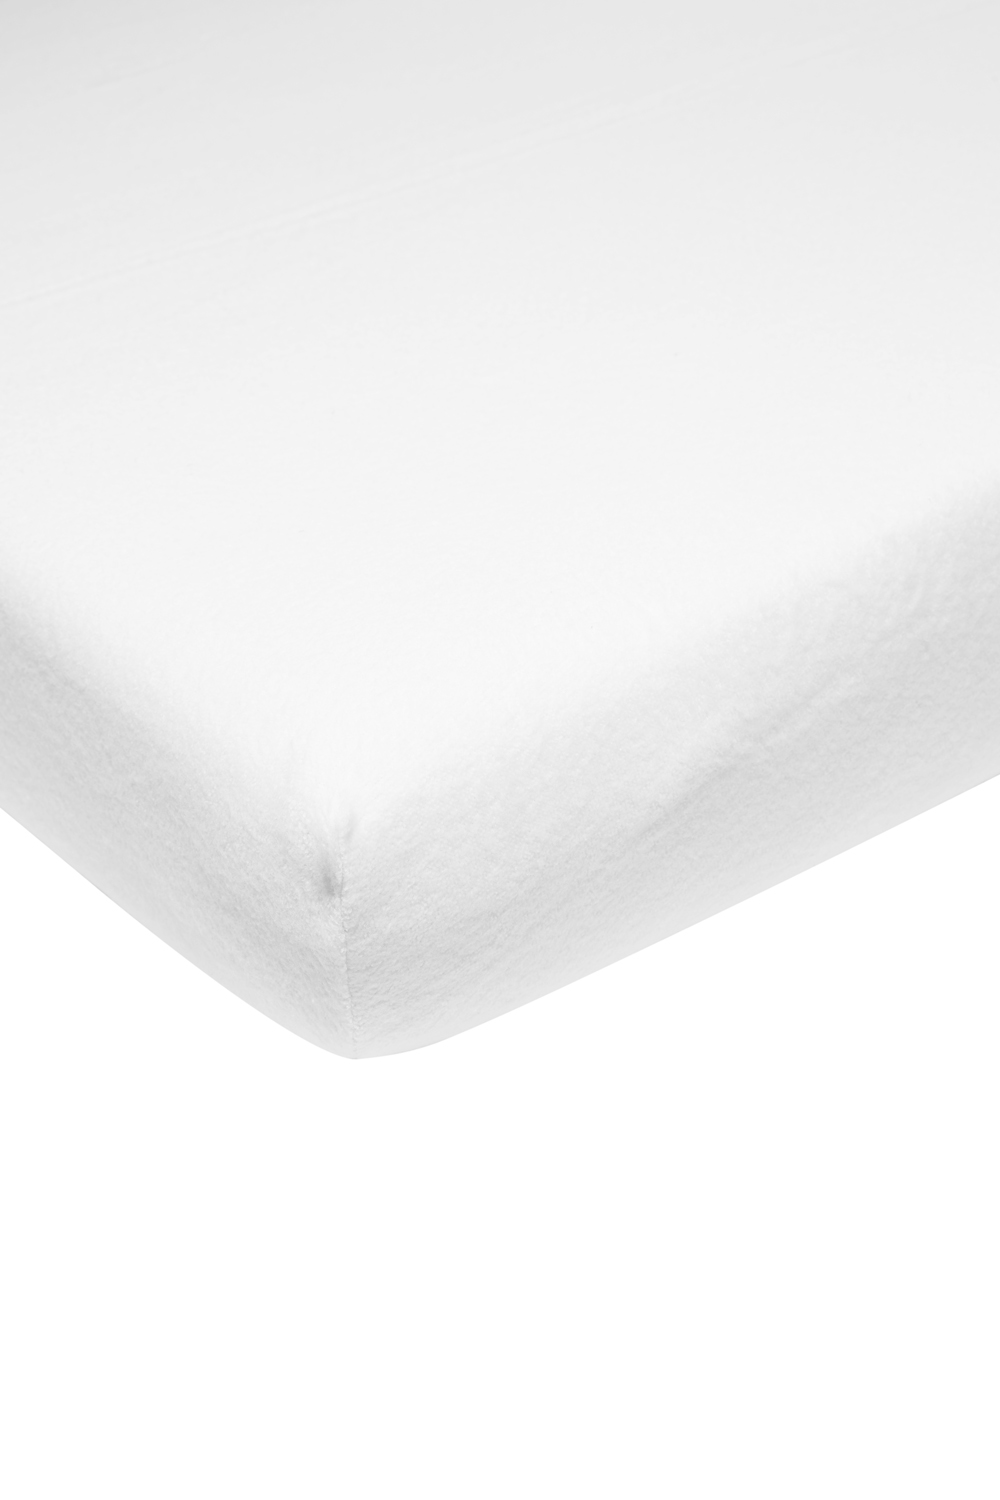 Molton stretch fitted sheet cot bed Uni - white - 60x120cm